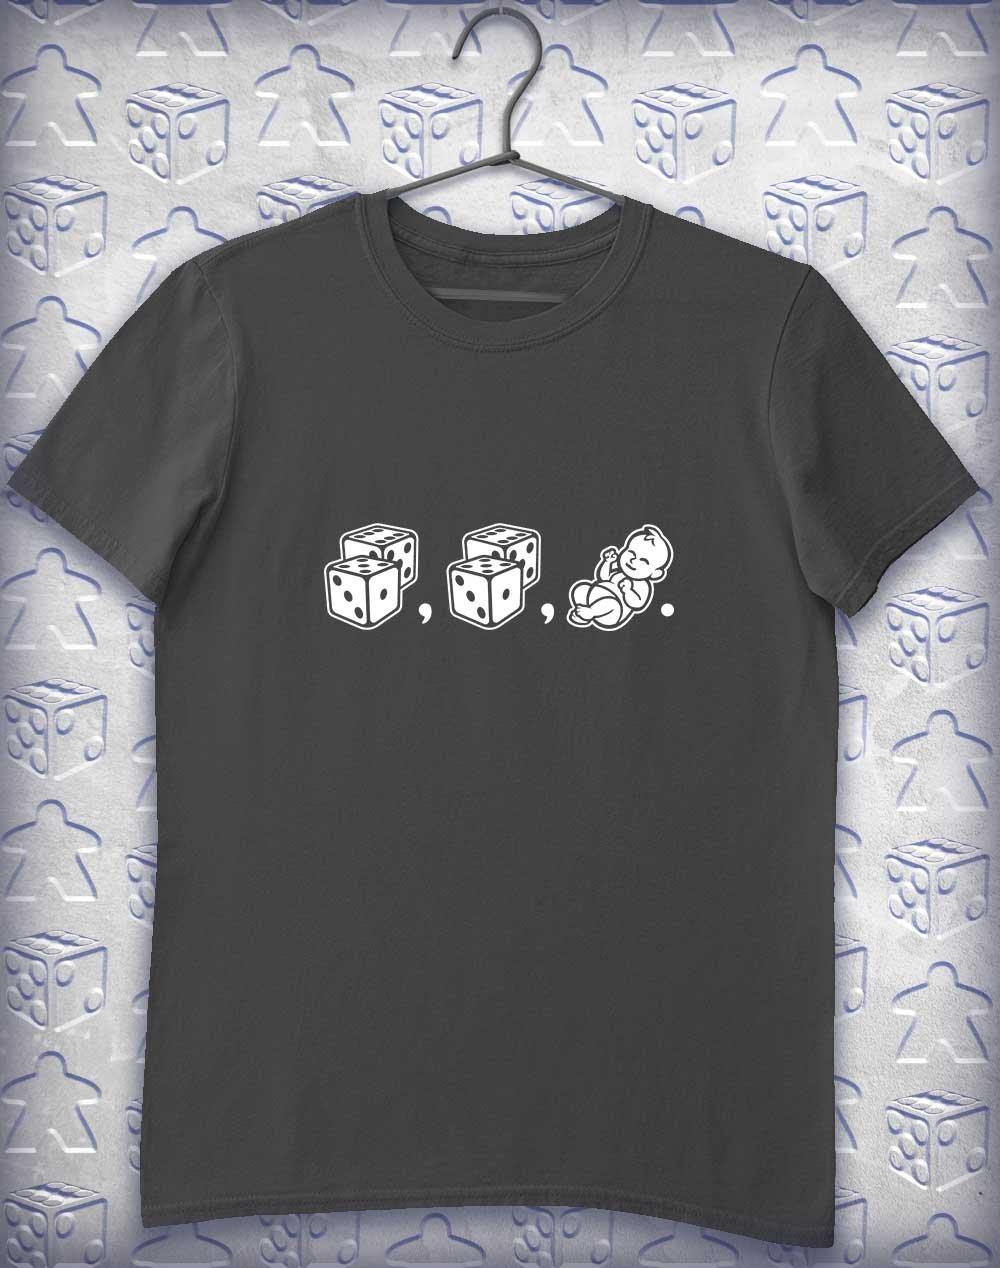 Dice Dice Baby (Plural) Alphagamer T-Shirt S / Charcoal  - Off World Tees